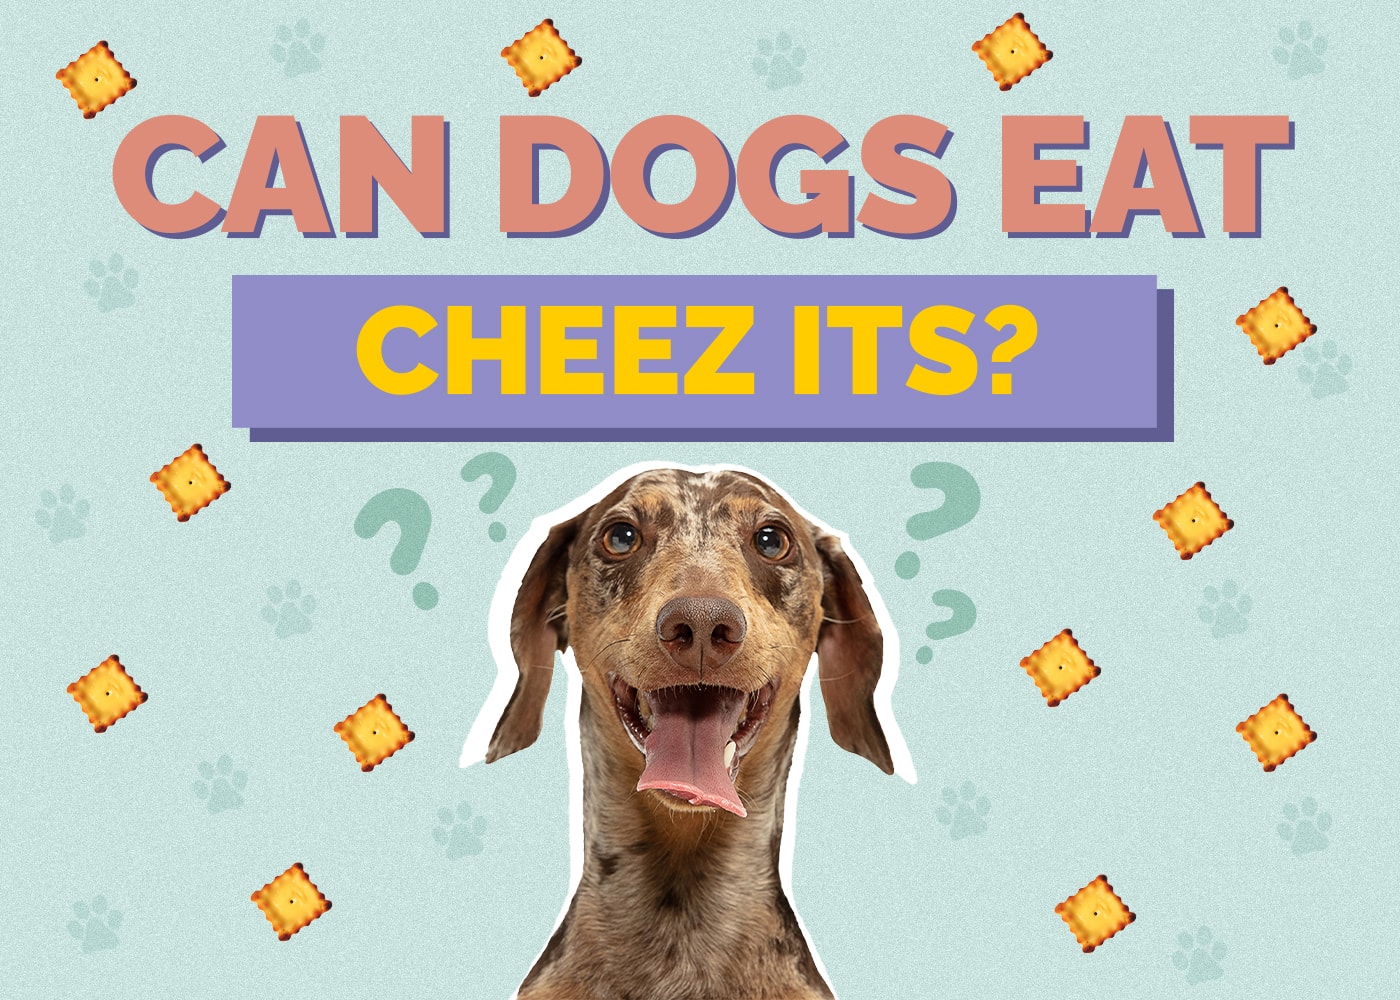 Can Dog Eat cheez-its